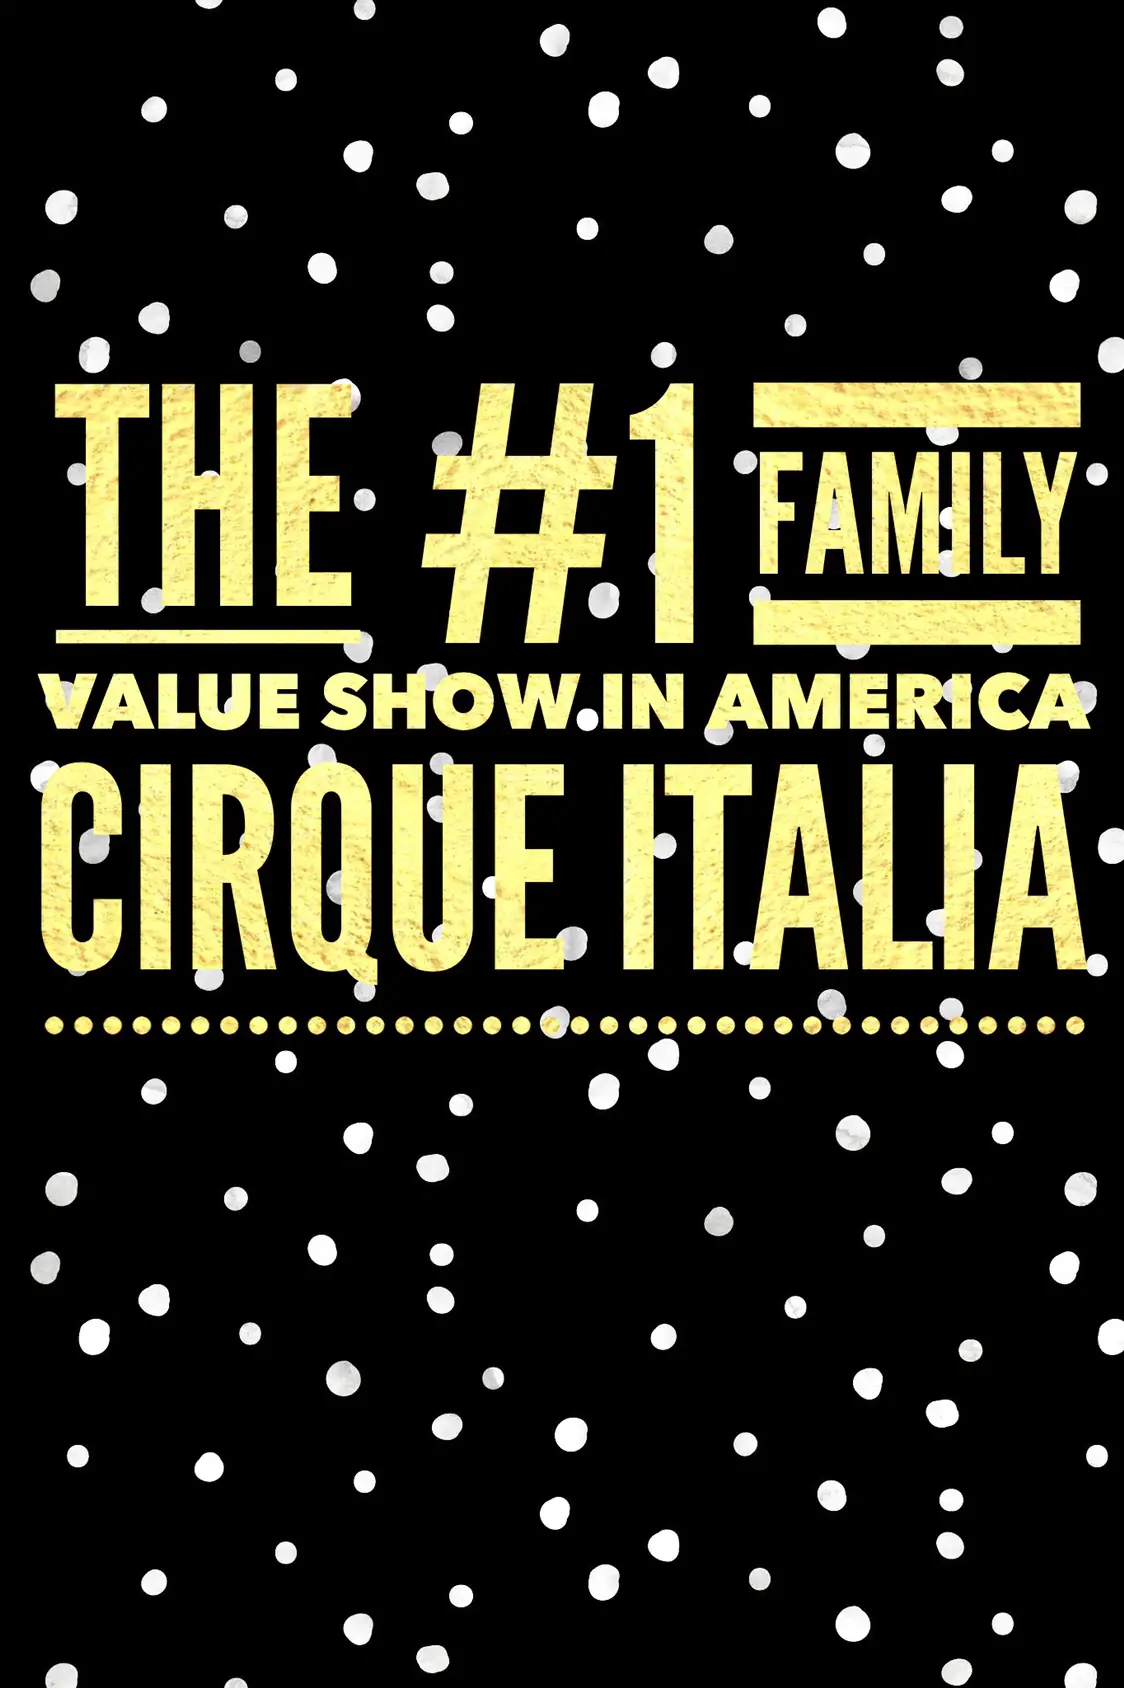 Cirque Italia is the Number 1 Family Value Touring Show in America! This amazing human water circus feat. juggling, tightrope, twirling, aerial gymnastics, contortionists & more from performers around the world to create an unforgettable show! #FamilyTravel #CirqueItalia #FamilyShows #FamilyActivities